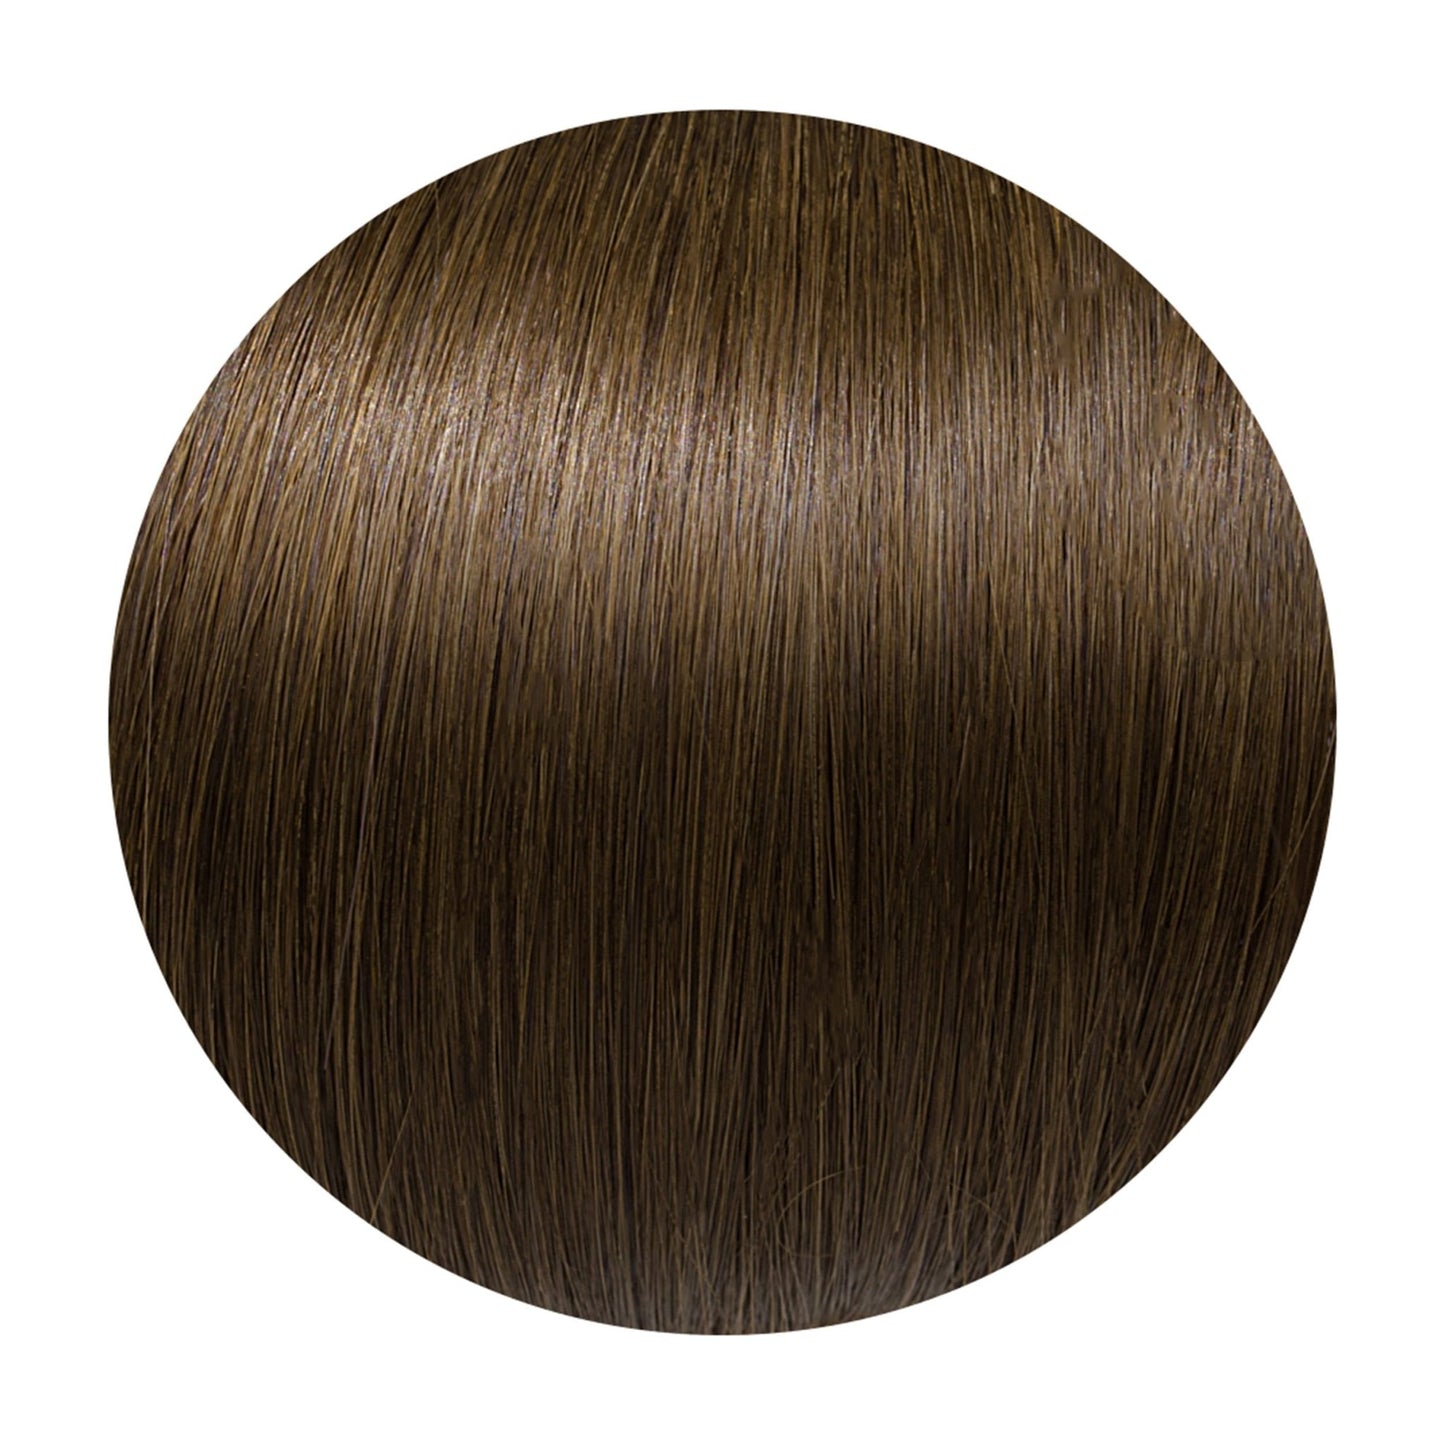 Seamless1 Espresso Human Hair in 1 Piece - shelley and co